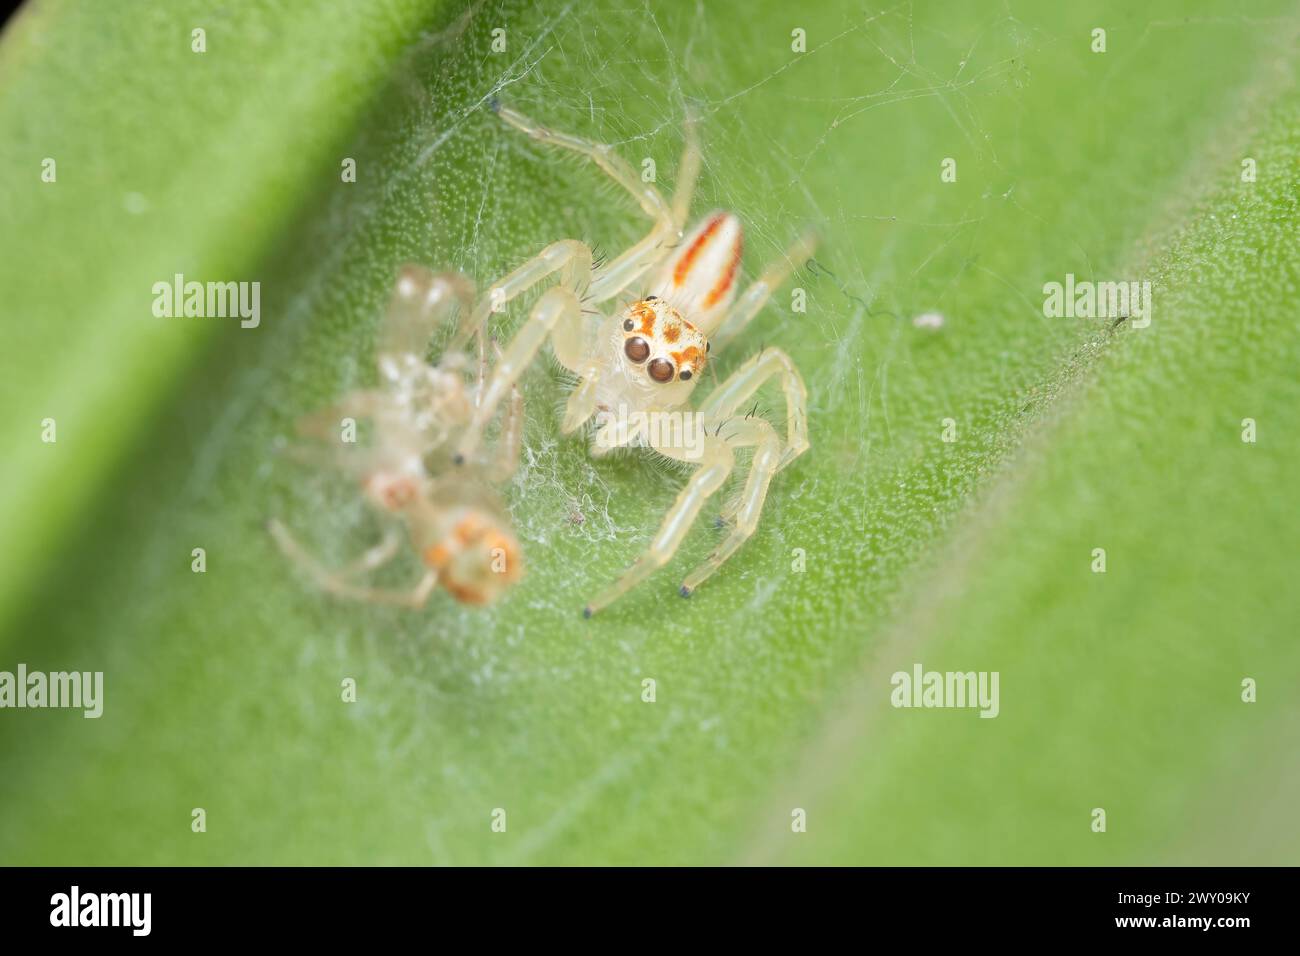 A freshly molted female Tealonia dimidiata spider in its habitat Stock Photo